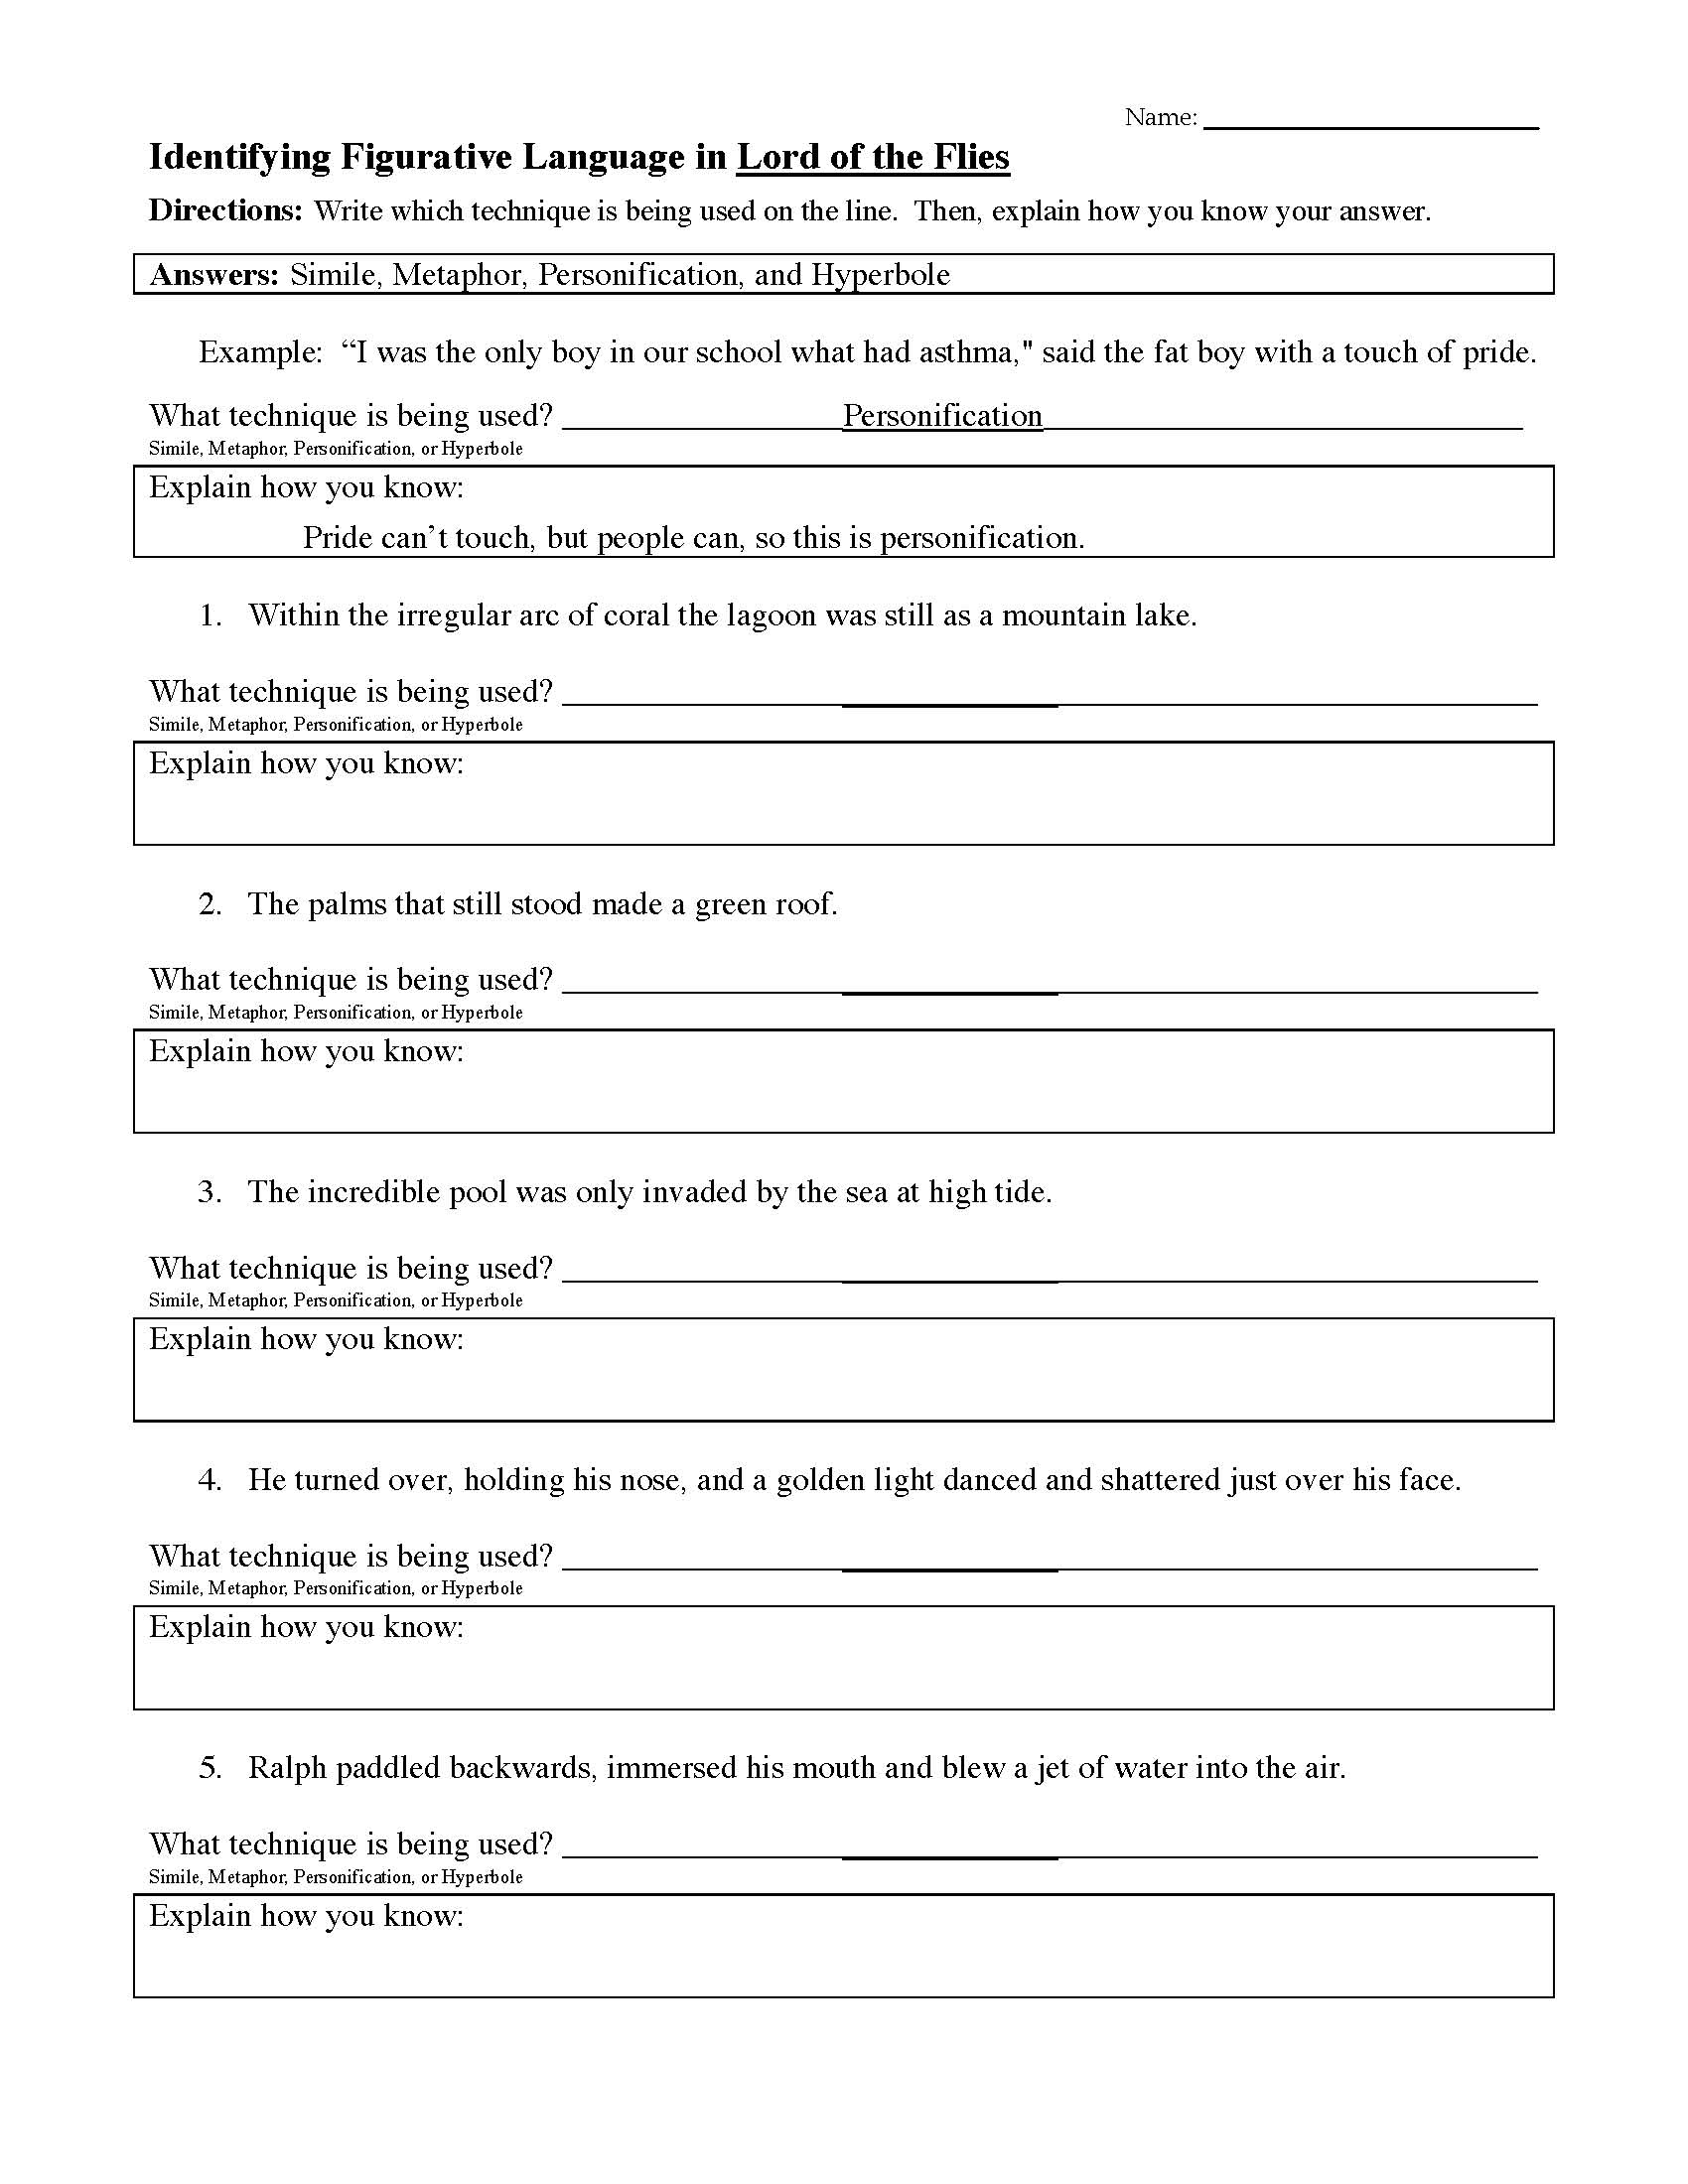 quot Lord of the Flies quot Figurative Language Worksheet Reading Activity